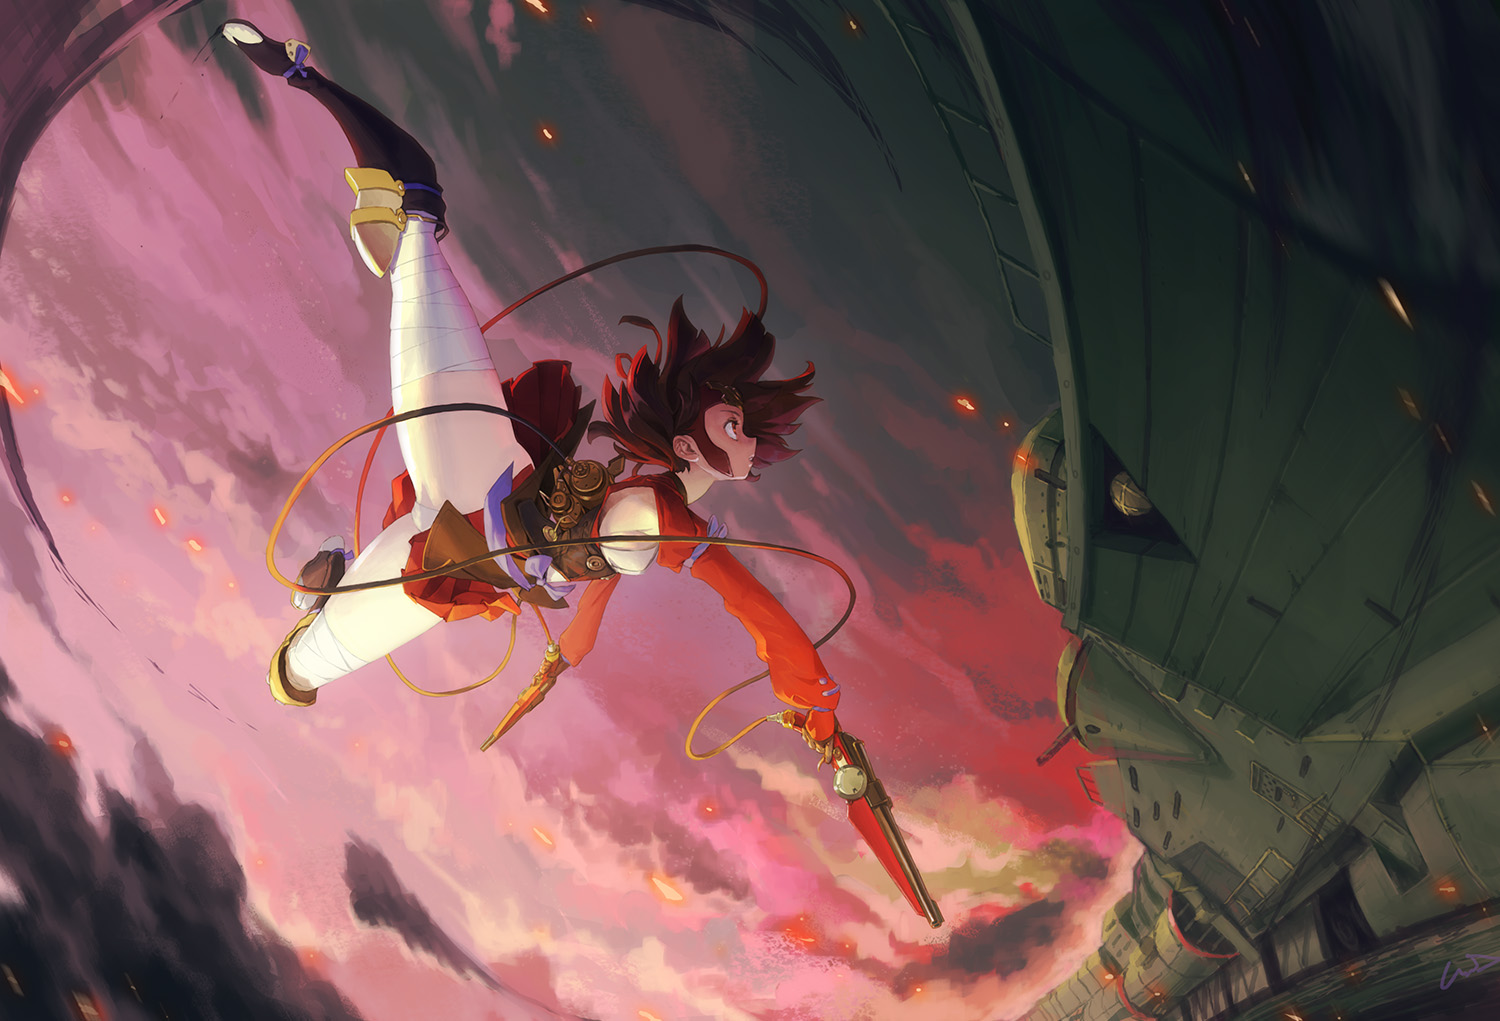 Anime 1500x1021 Koutetsujou no Kabaneri anime girls Mumei fantasy weapon brunette short hair small boobs train female soldier girls with guns hair blowing in the wind thighs the gap white panties no bra sideboob thick thigh black boots glutes spread legs sunset 2D anime fan art